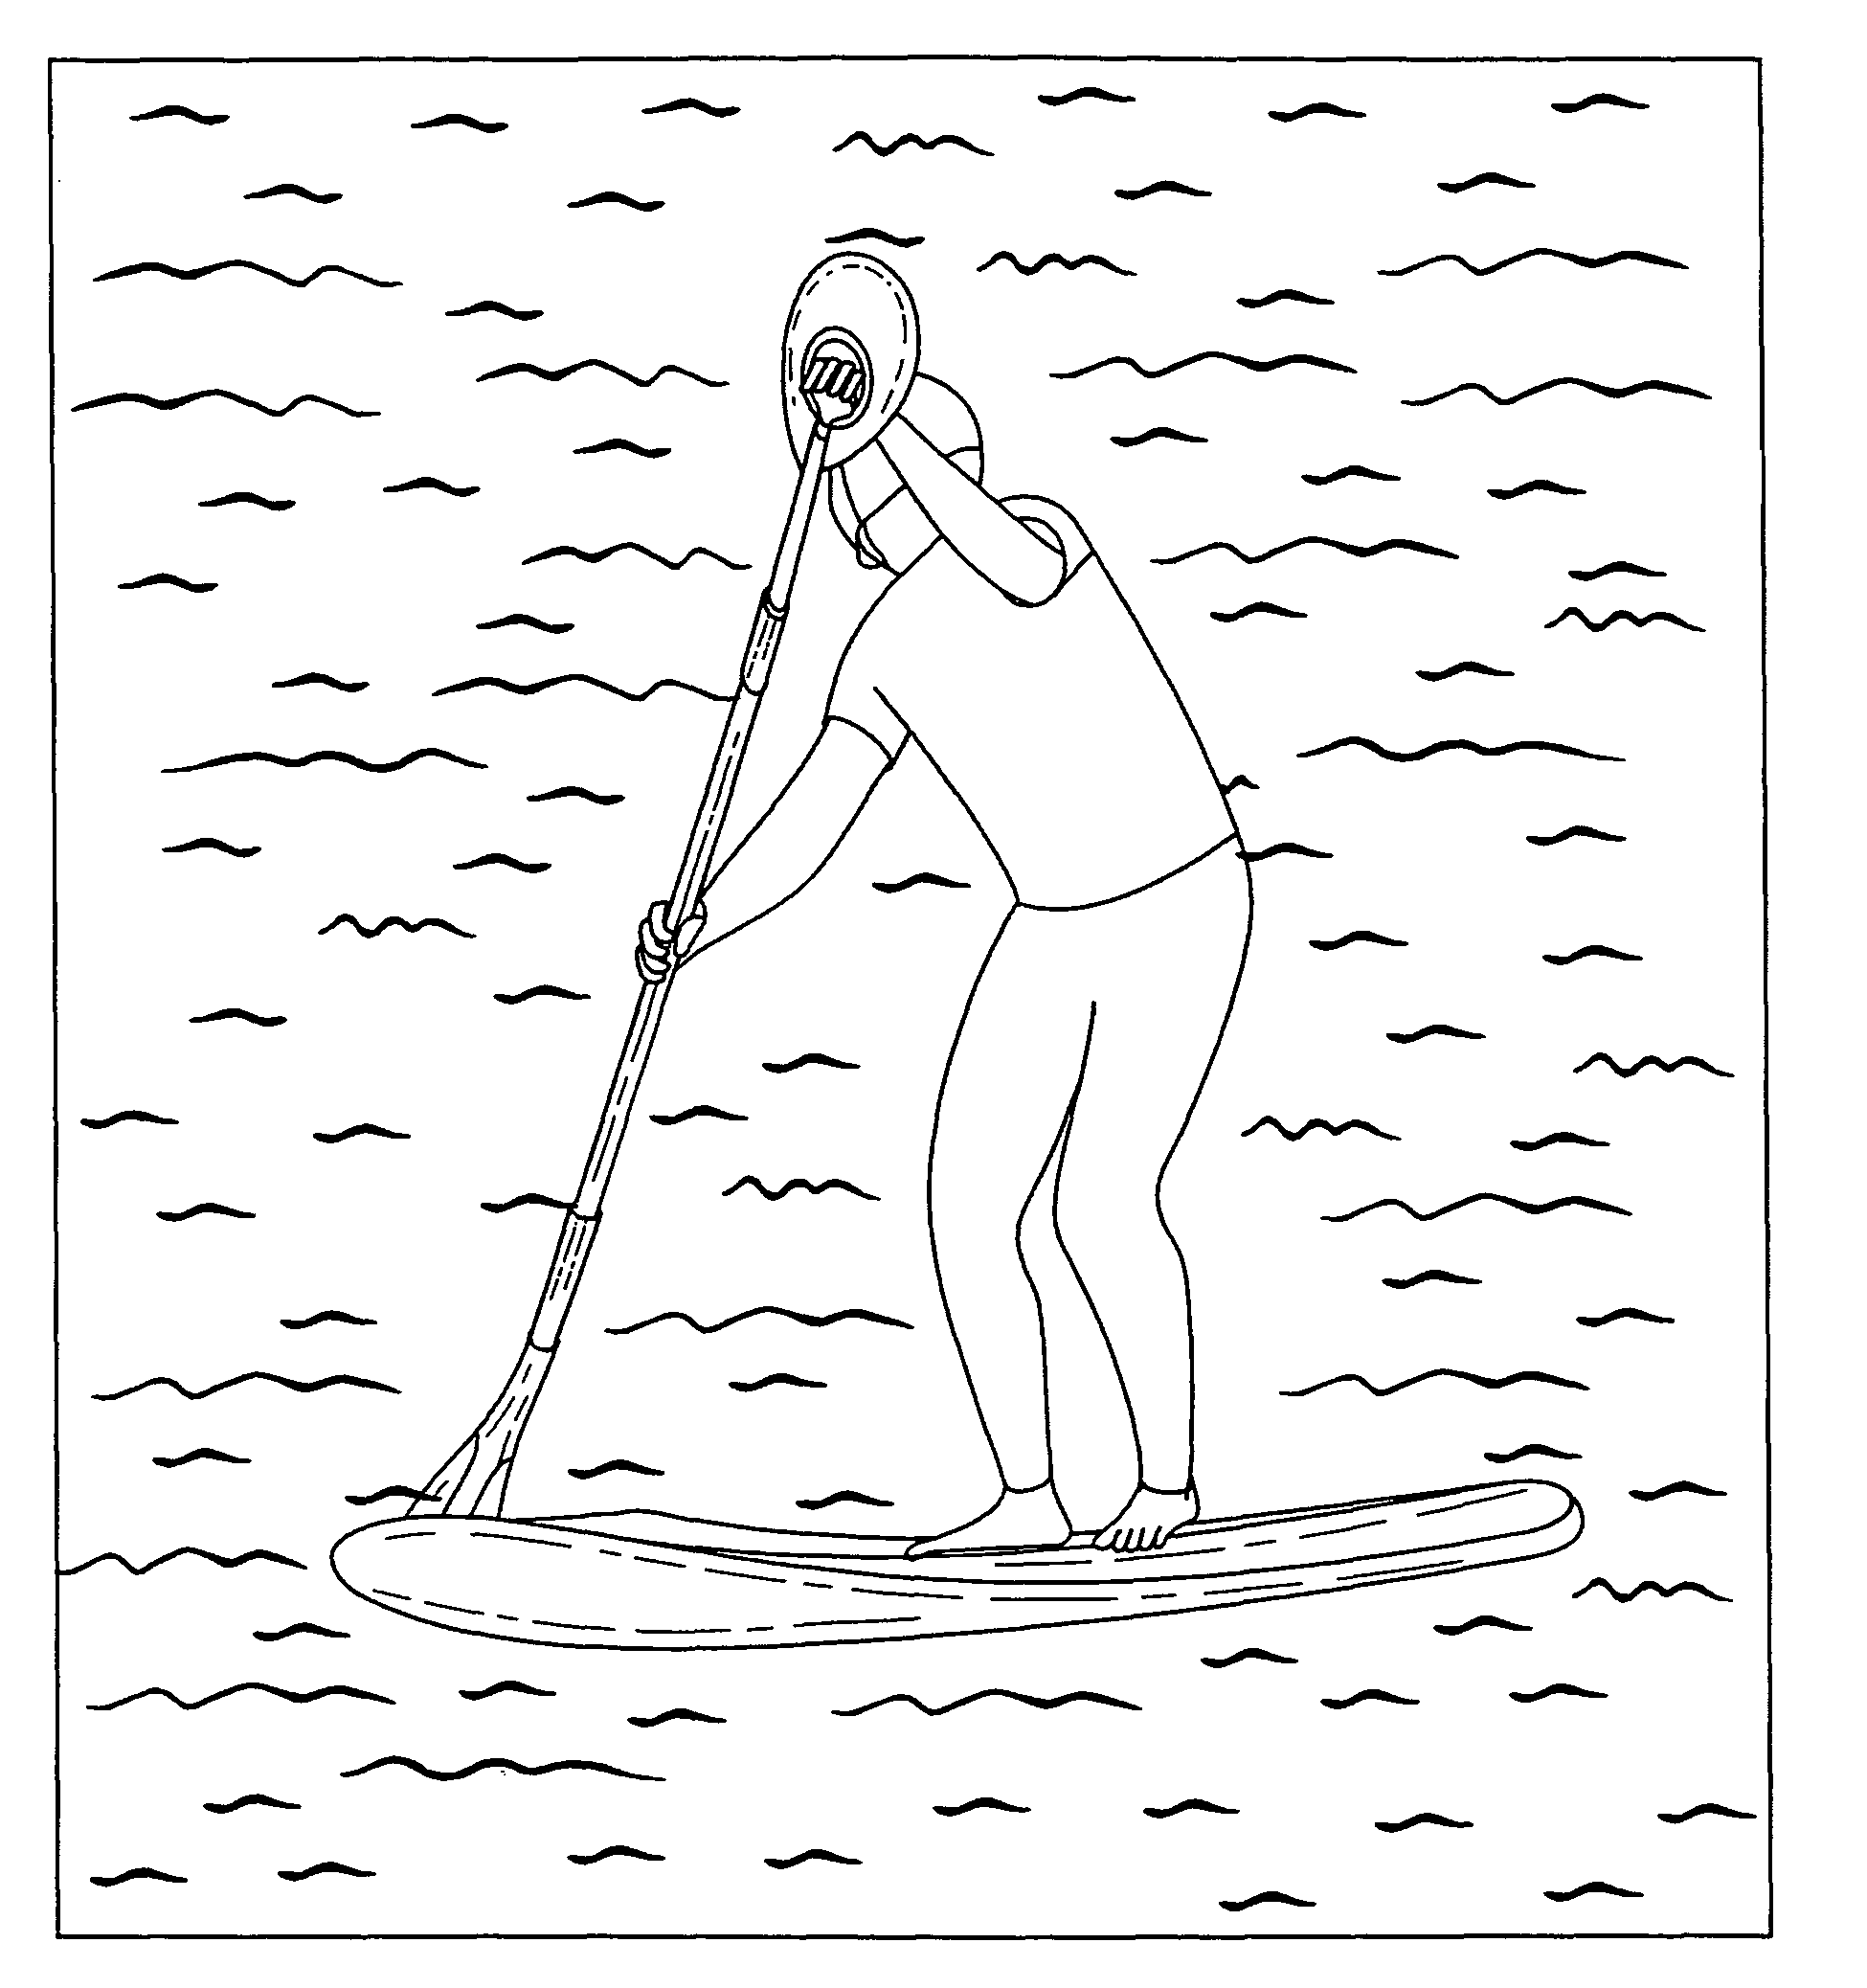 Paddle blade that allows use of a handle and/or paddle for any way paddling